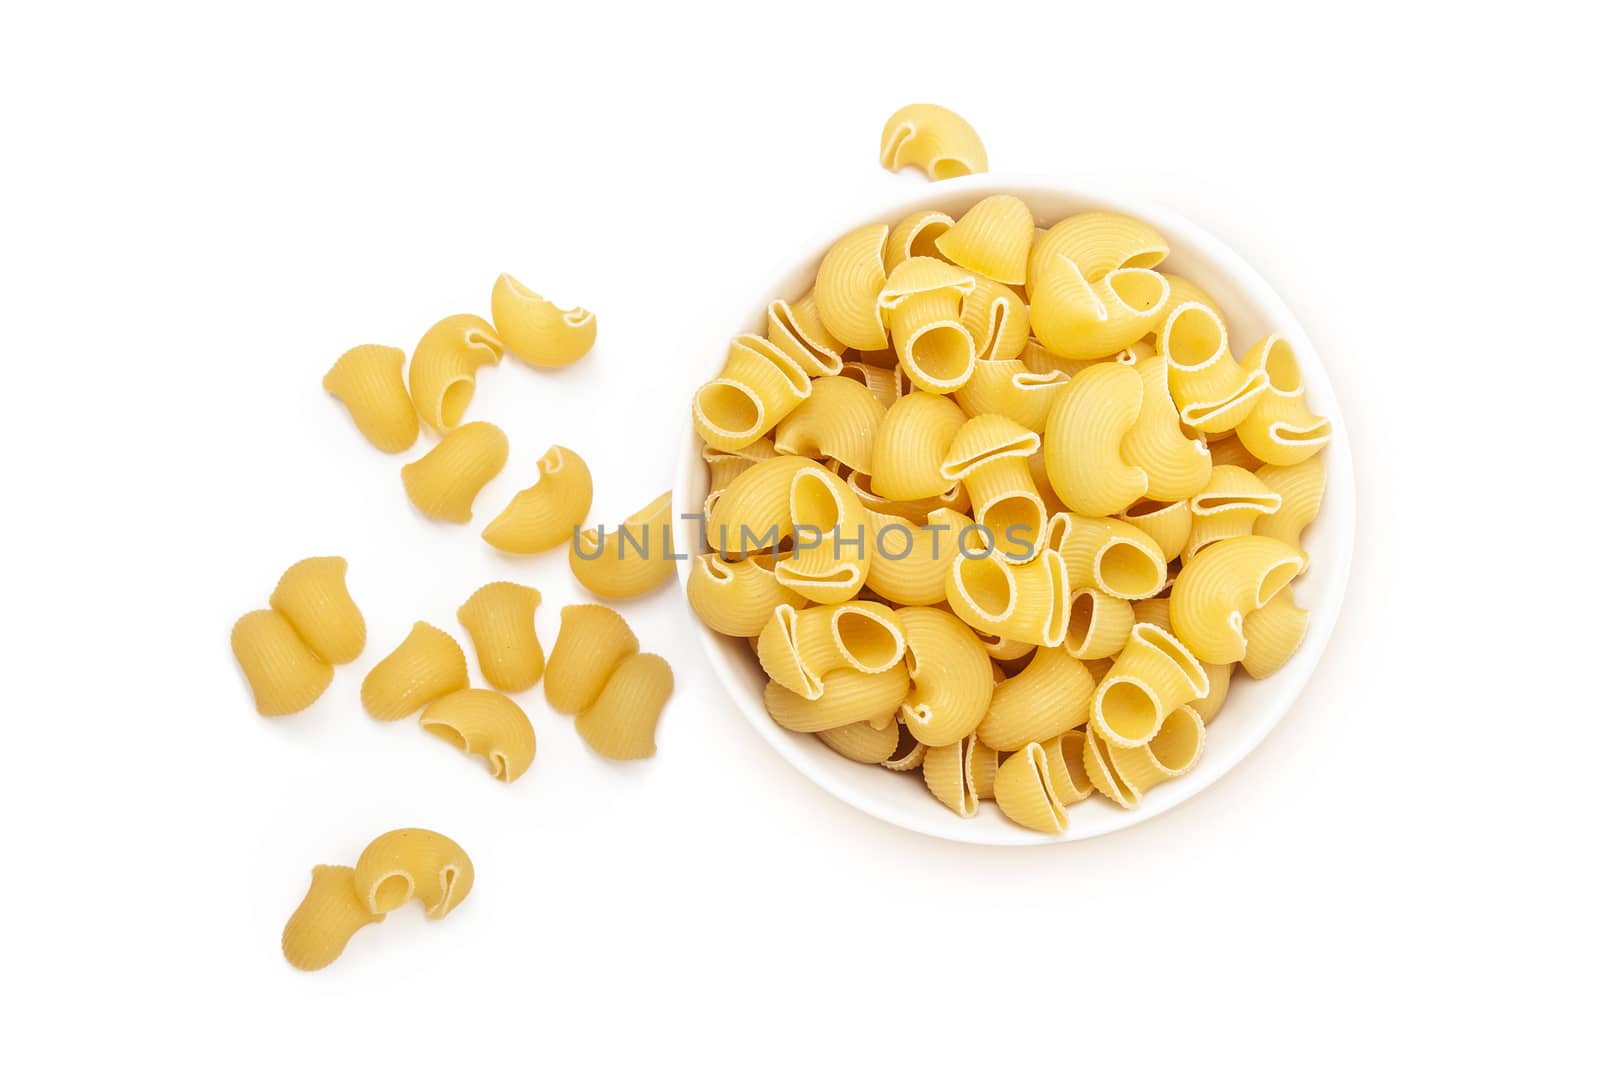 Pasta Pipe Rigate in a white bowl. Isolated on a white background. Top wiew